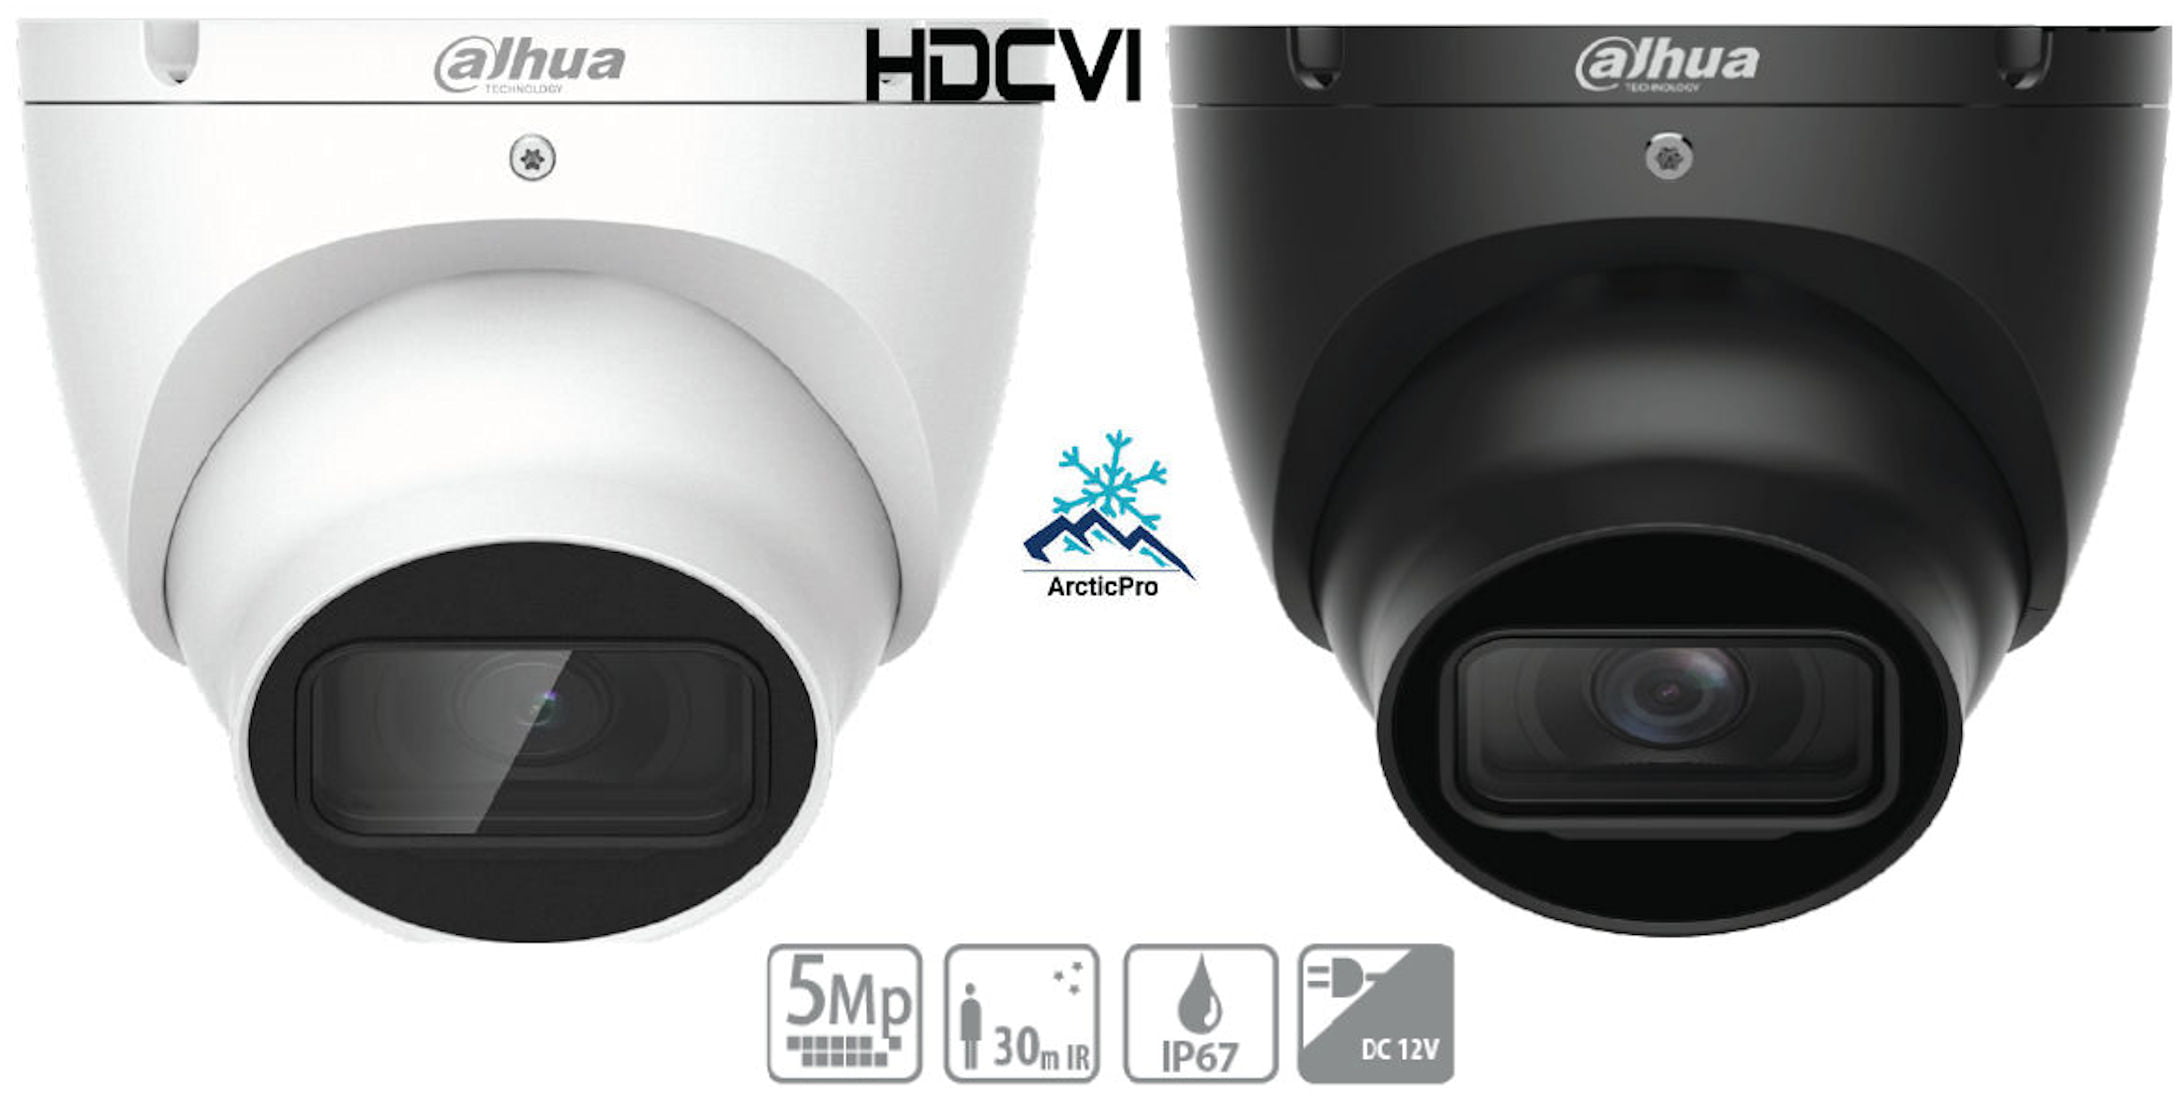 Dahua Technology A51BJ02 5MP Outdoor HDCVI Turret Camera with Night Vision